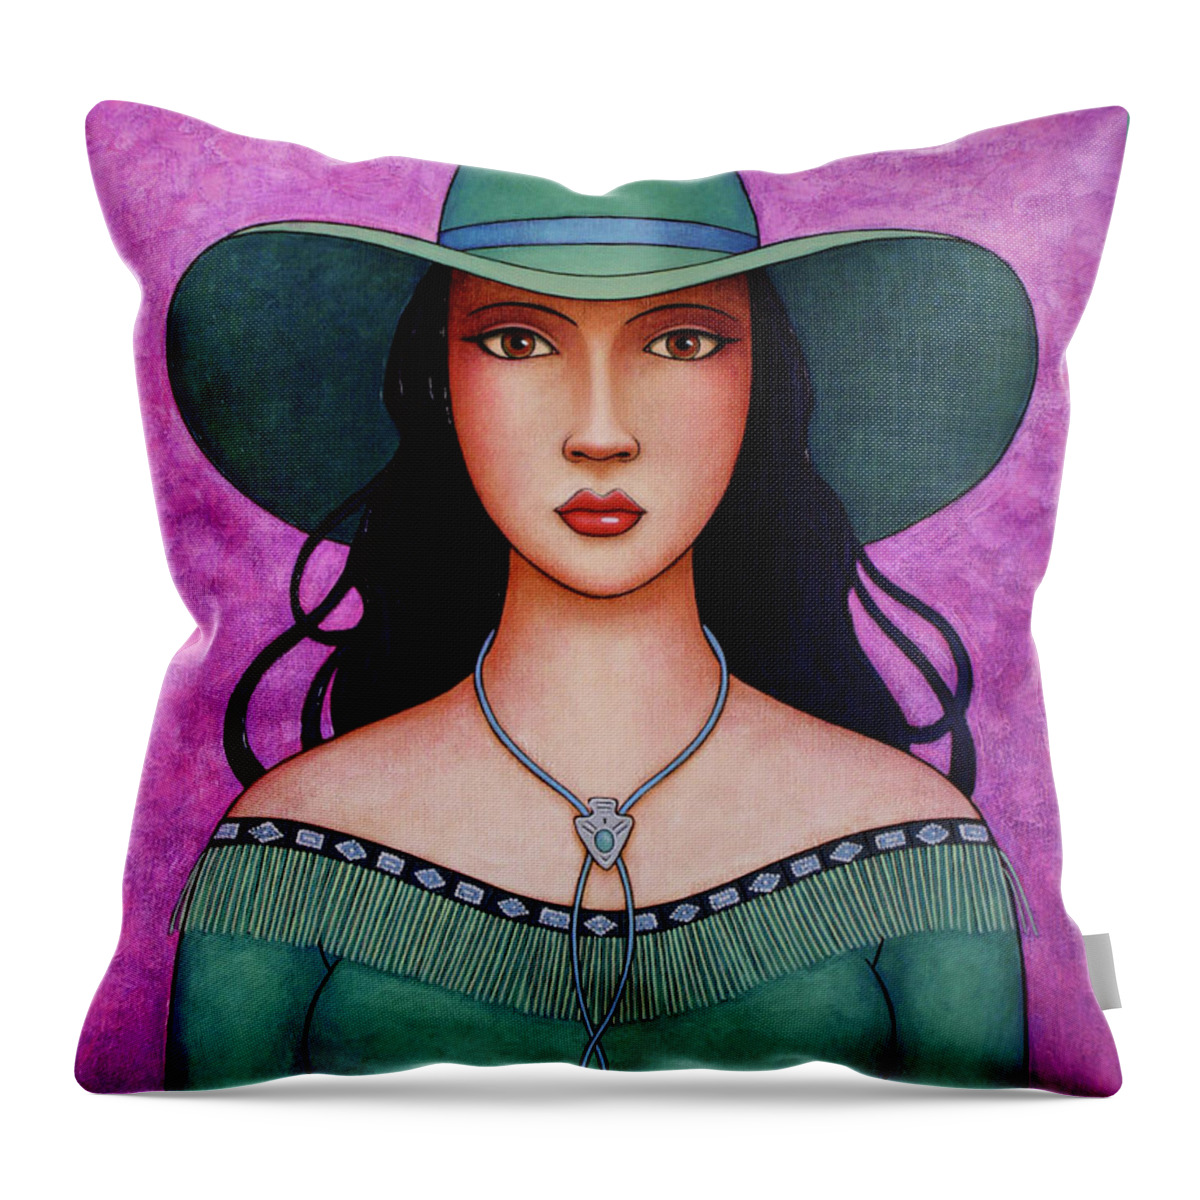 Cowgirl Throw Pillow featuring the painting Western Woman by Norman Engel